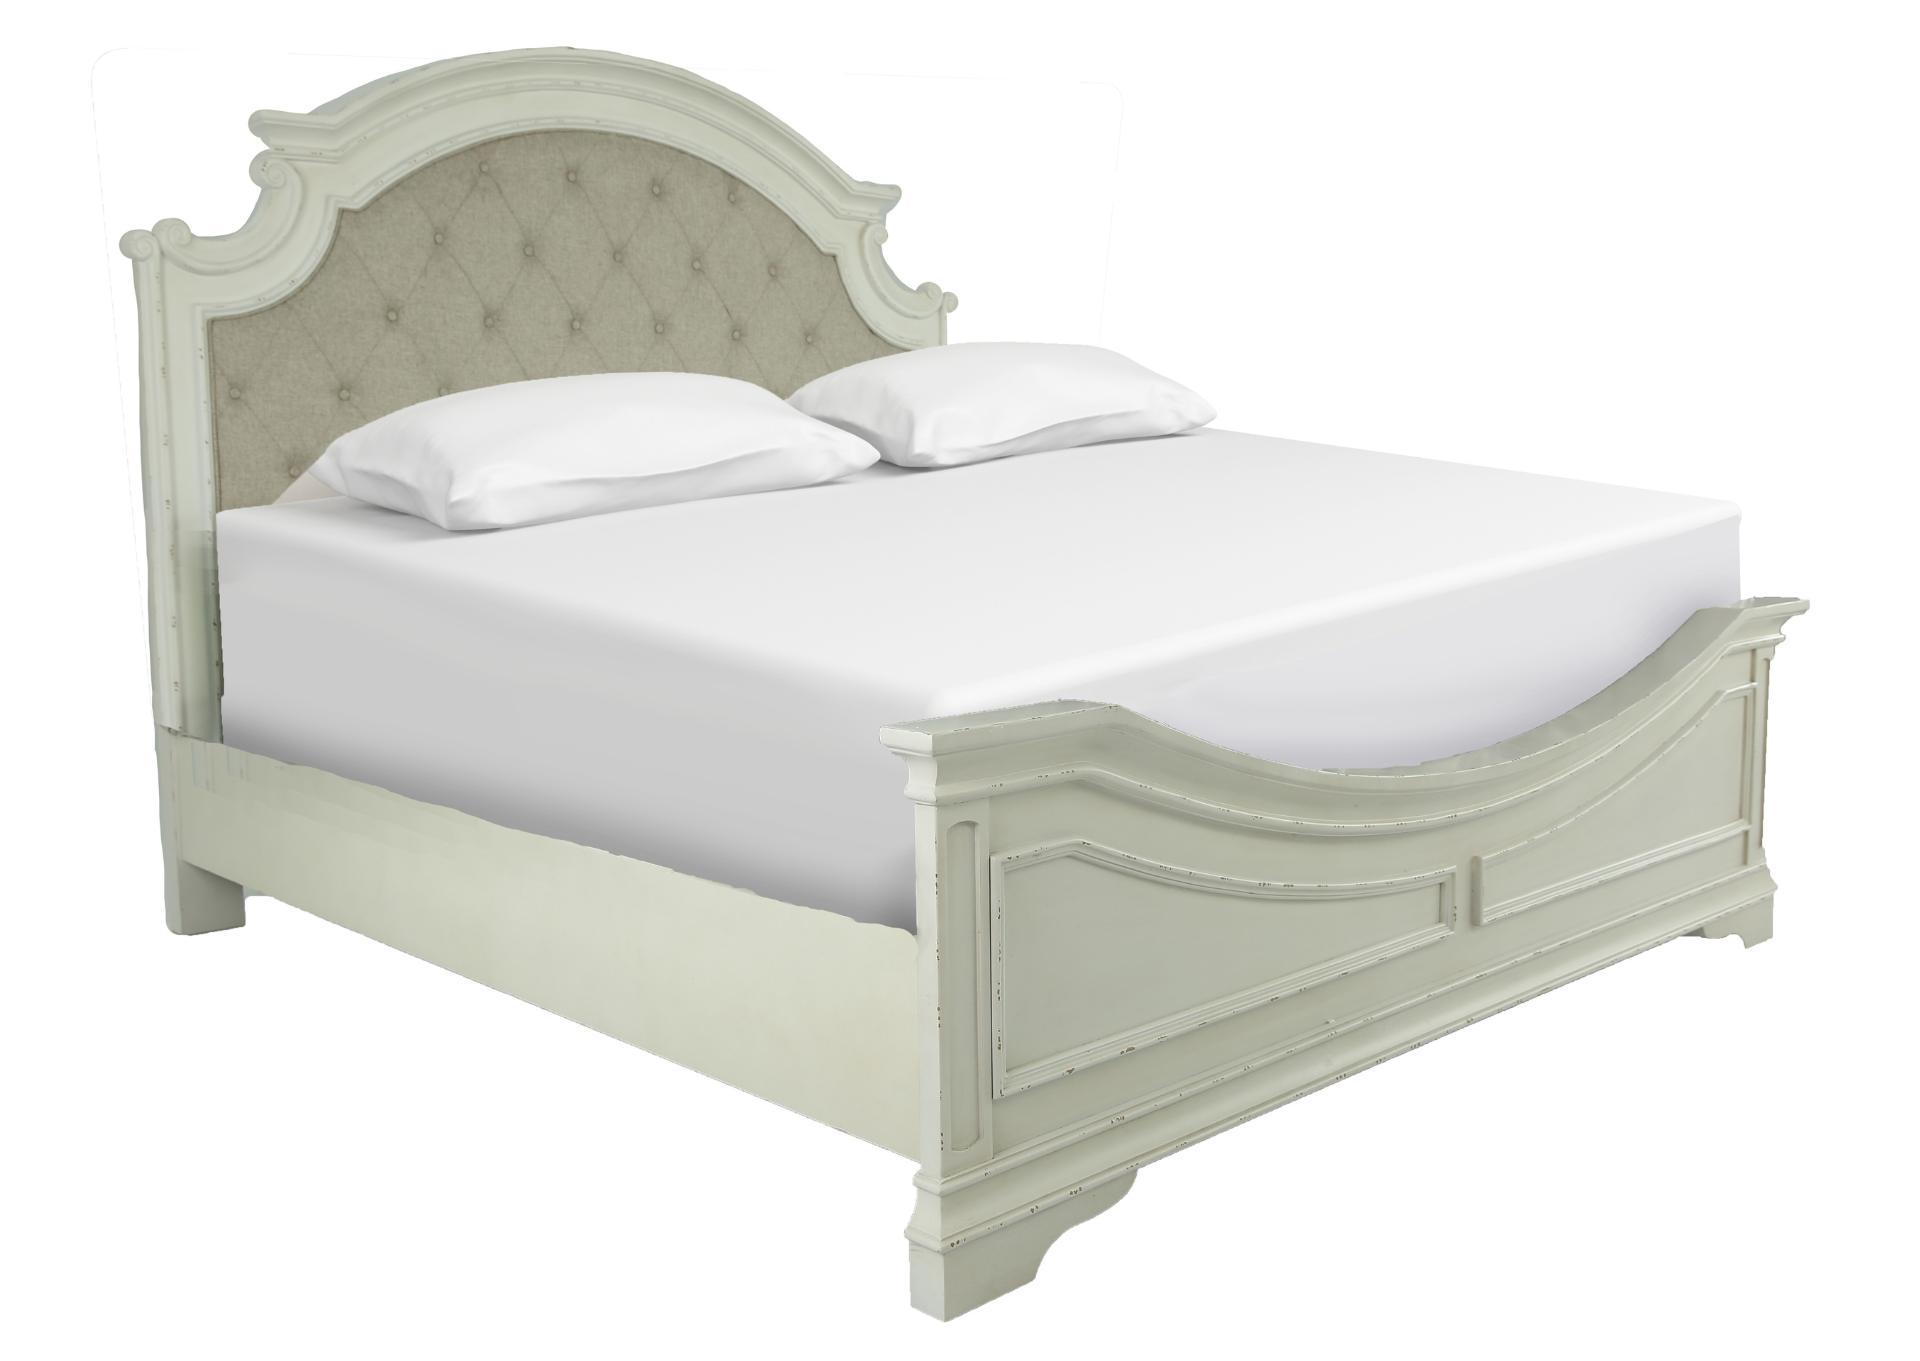 HAVEN WHITE QUEEN UPHOLSTERED BED,LIFESTYLE FURNITURE